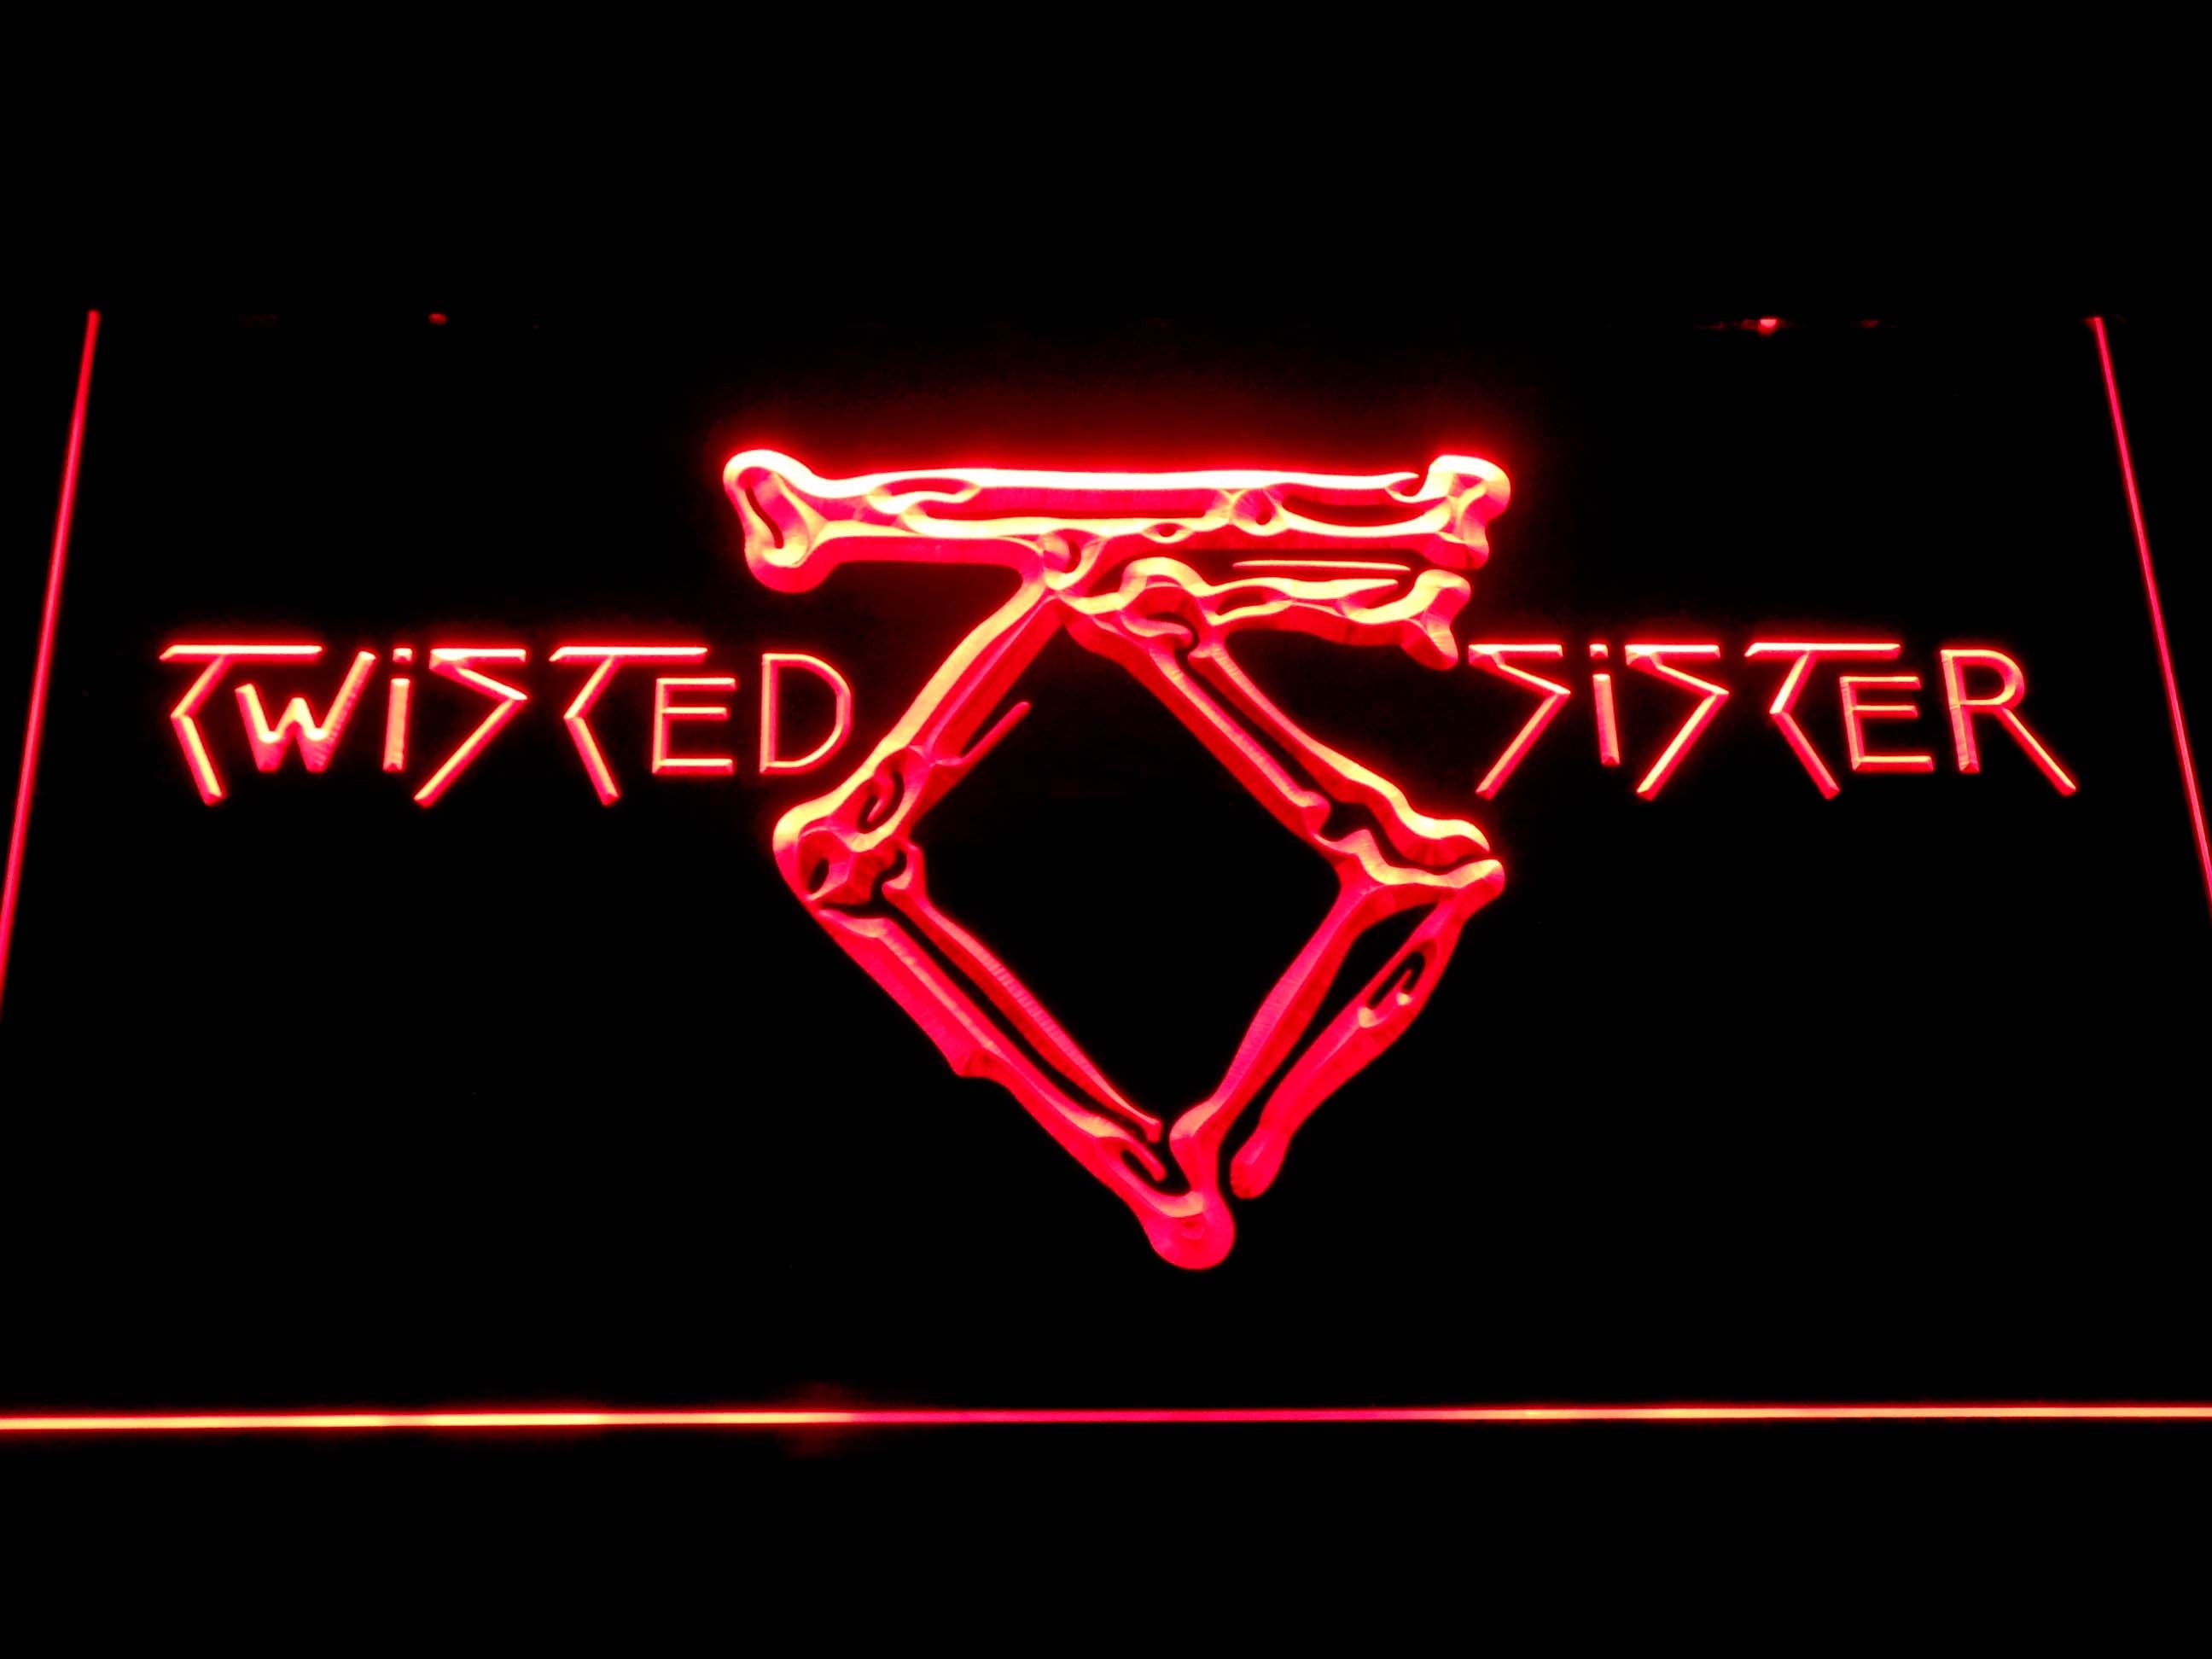 Twisted Sister Band LED Neon Sign